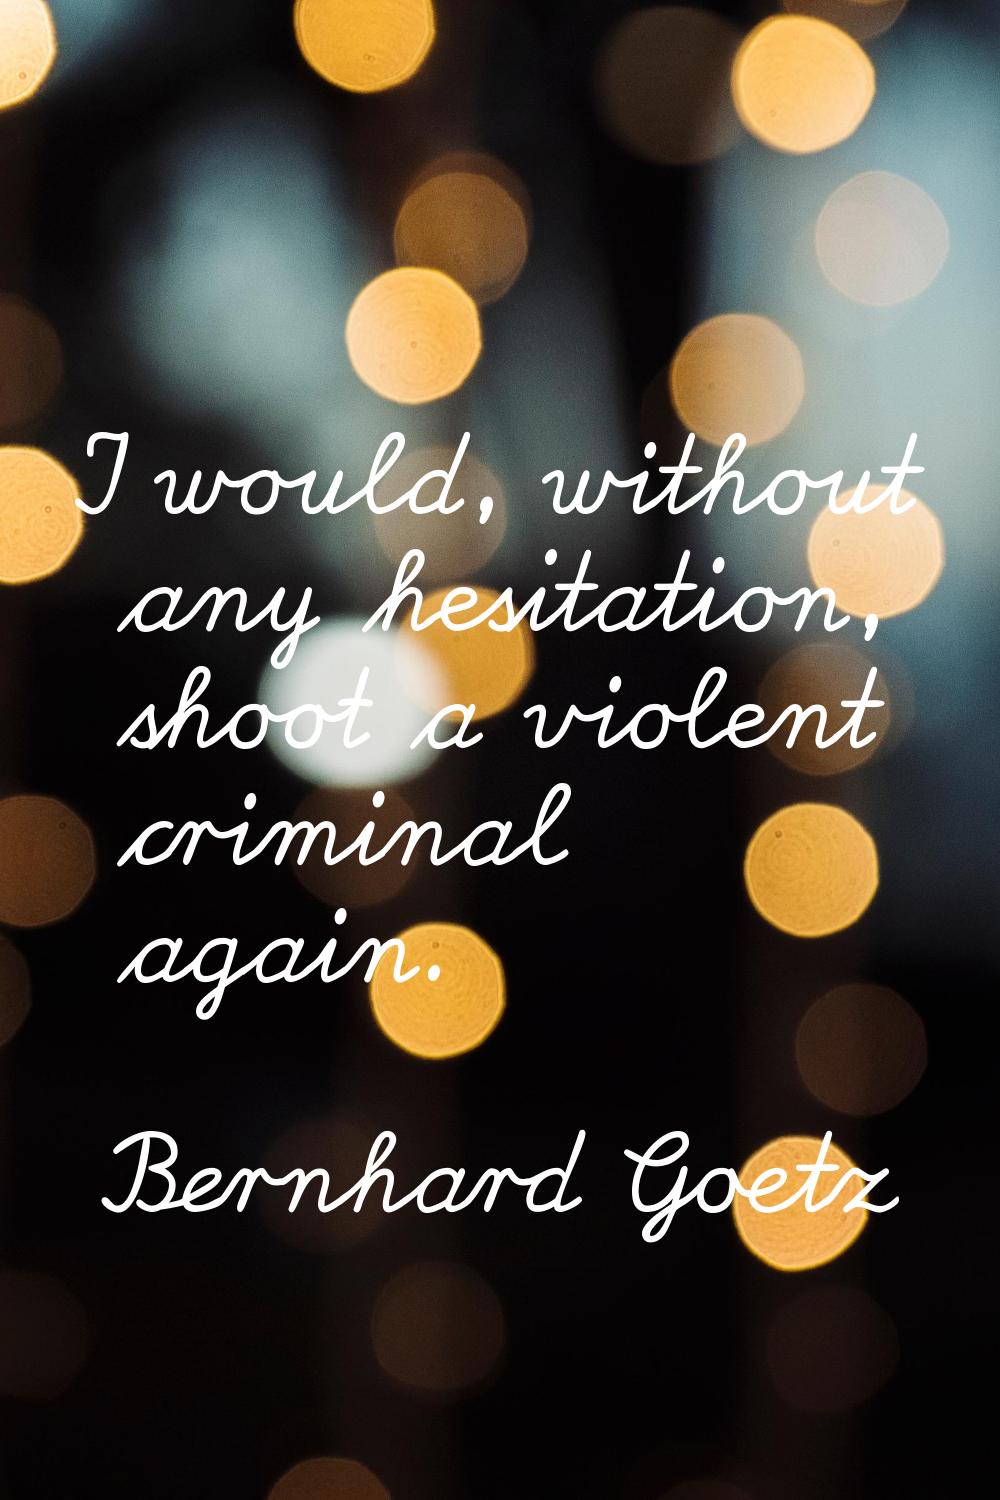 I would, without any hesitation, shoot a violent criminal again.